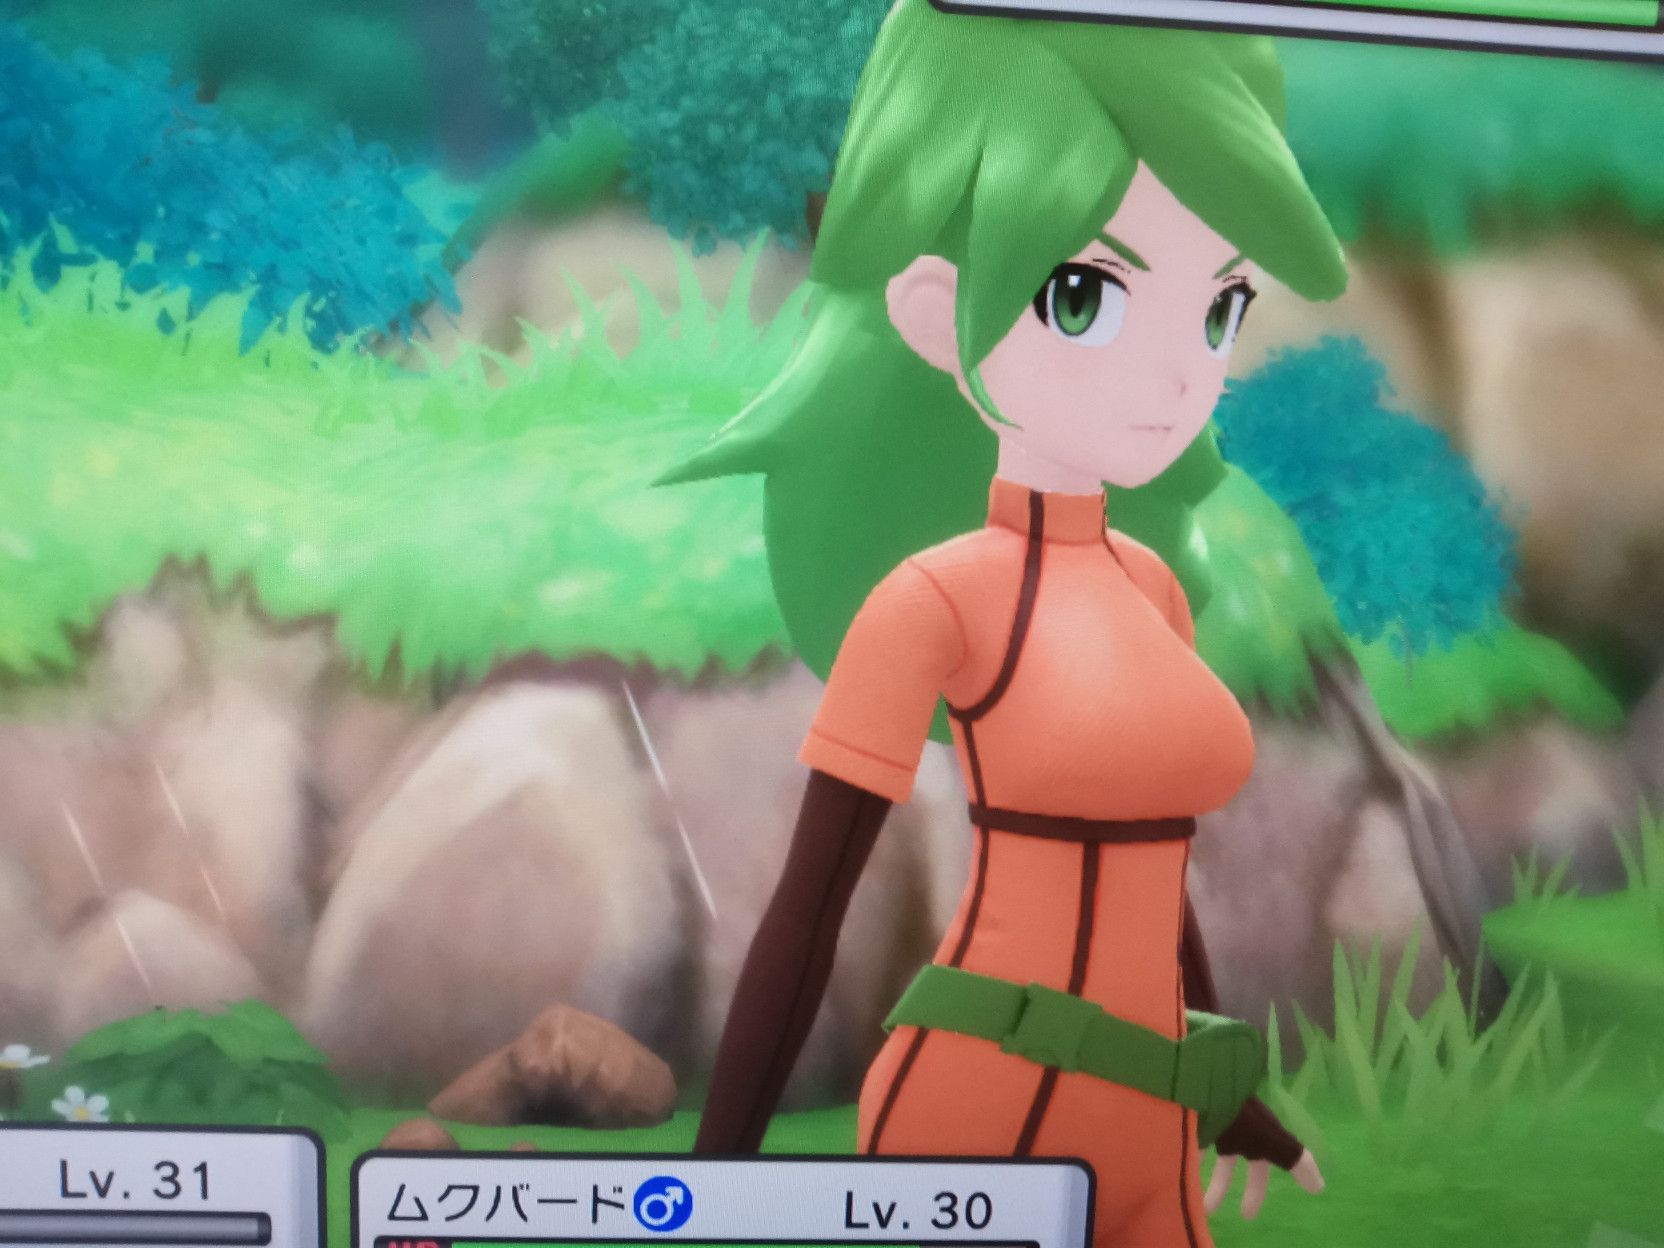 【Image】Pokémon remake released this week, Ginga executives too wwwww 11